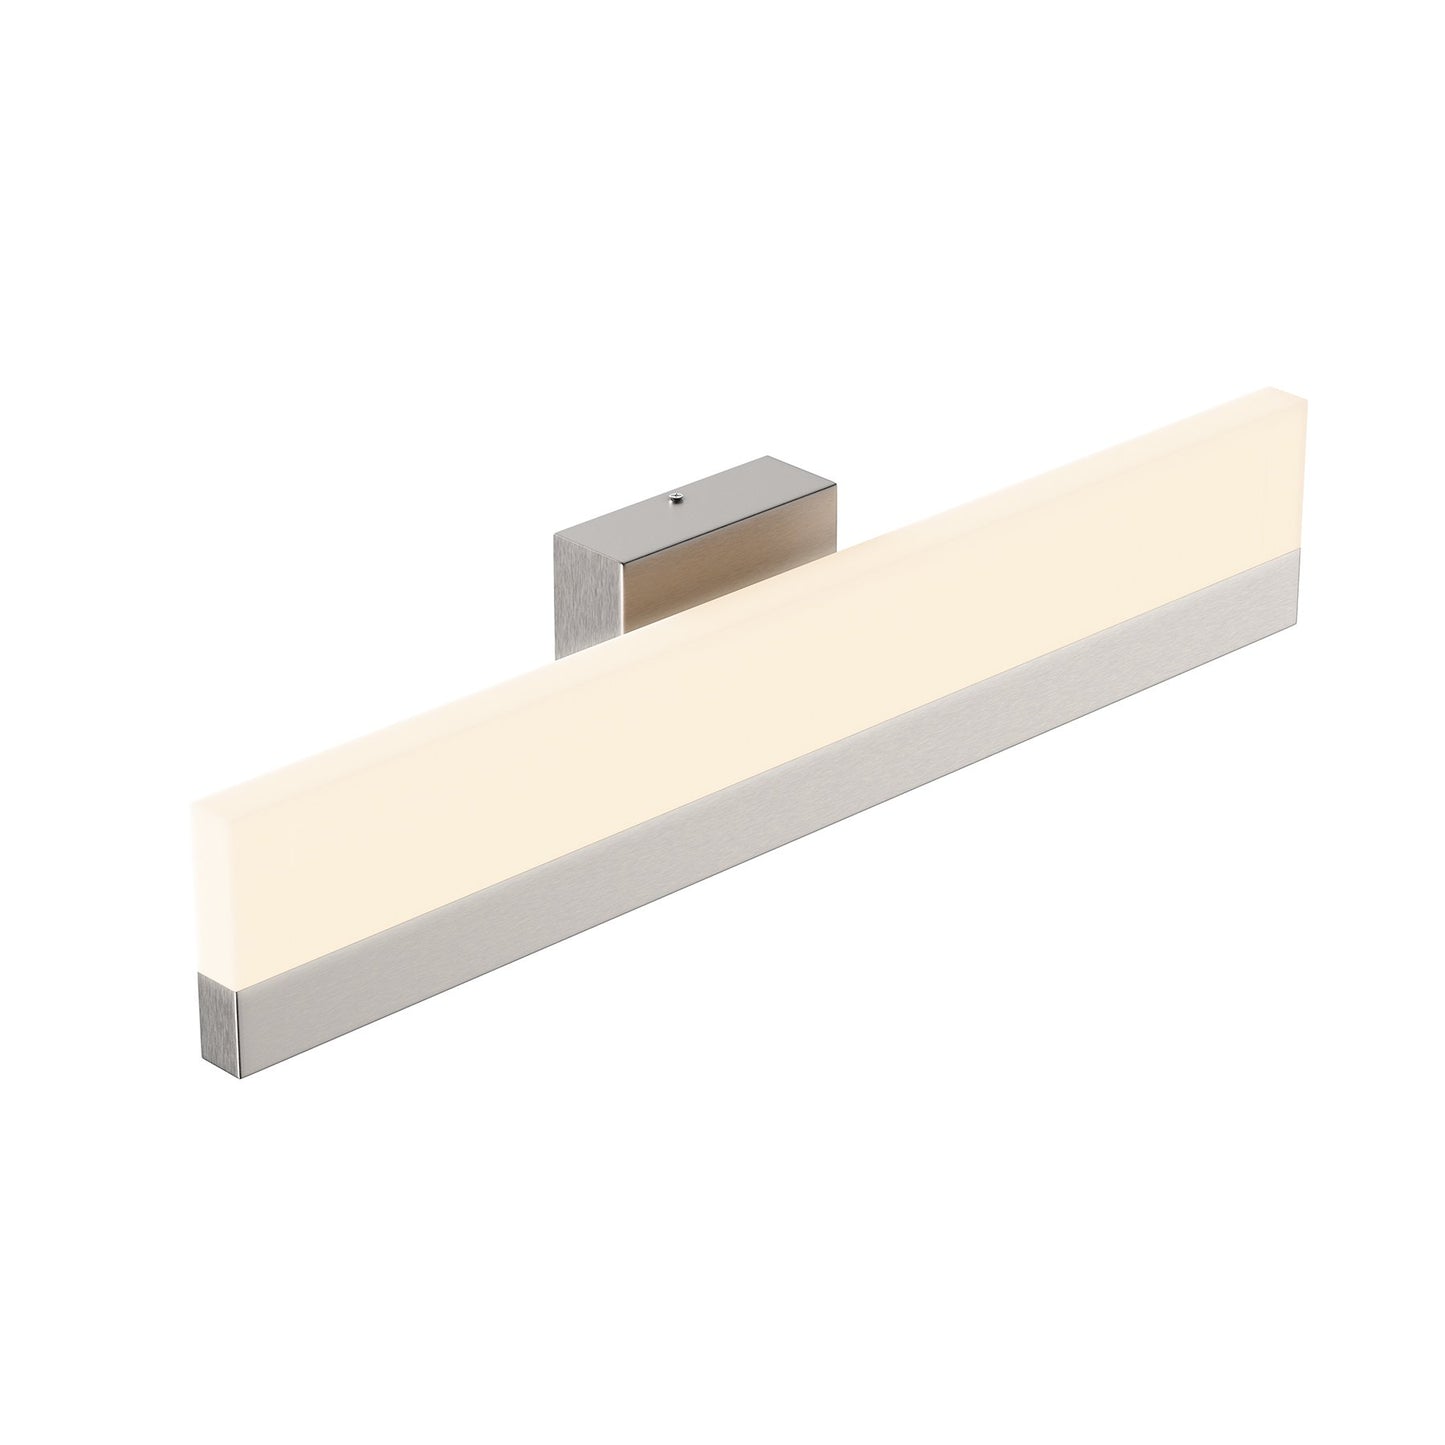 Bathroom Light Fixtures, 4000K (Cool White), Brushed Nickel Finish, For Damp Location,Wall Mount, Vanity Lighting